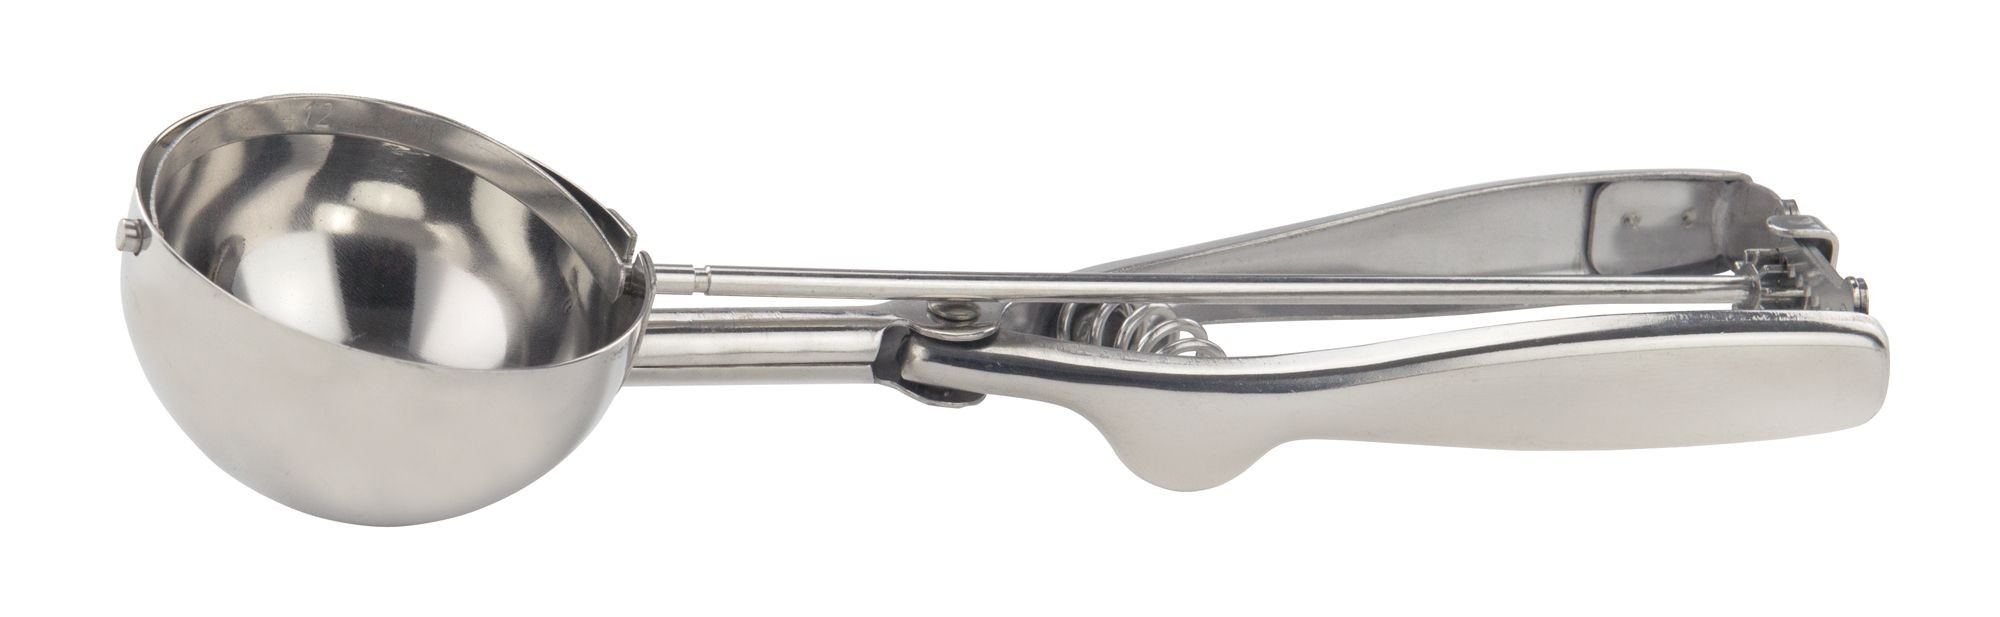 Winco ISS-12 Stainless Steel 3-1/4 oz. Disher/Portioner, Size 12